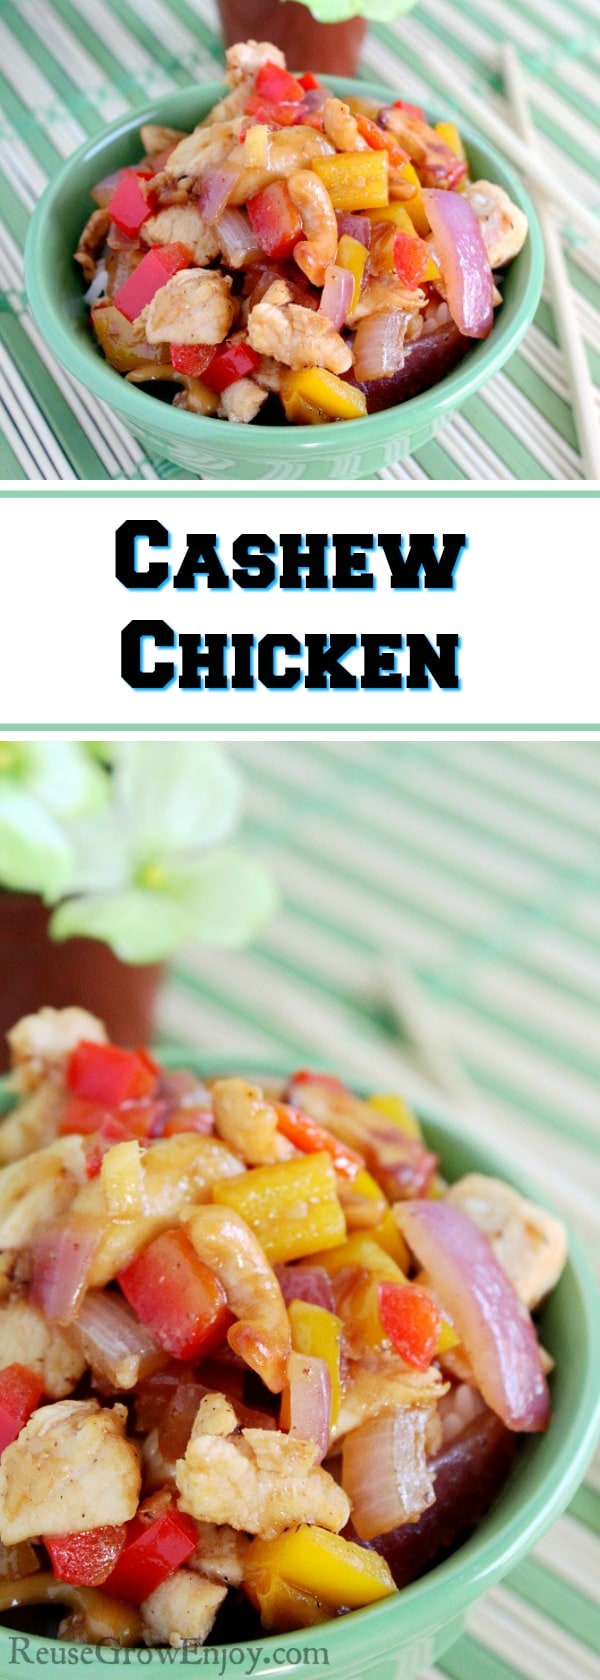 If you like chicken and are looking for something new to try, I have just the thing for you. Check out this Cashew Chicken Recipe!